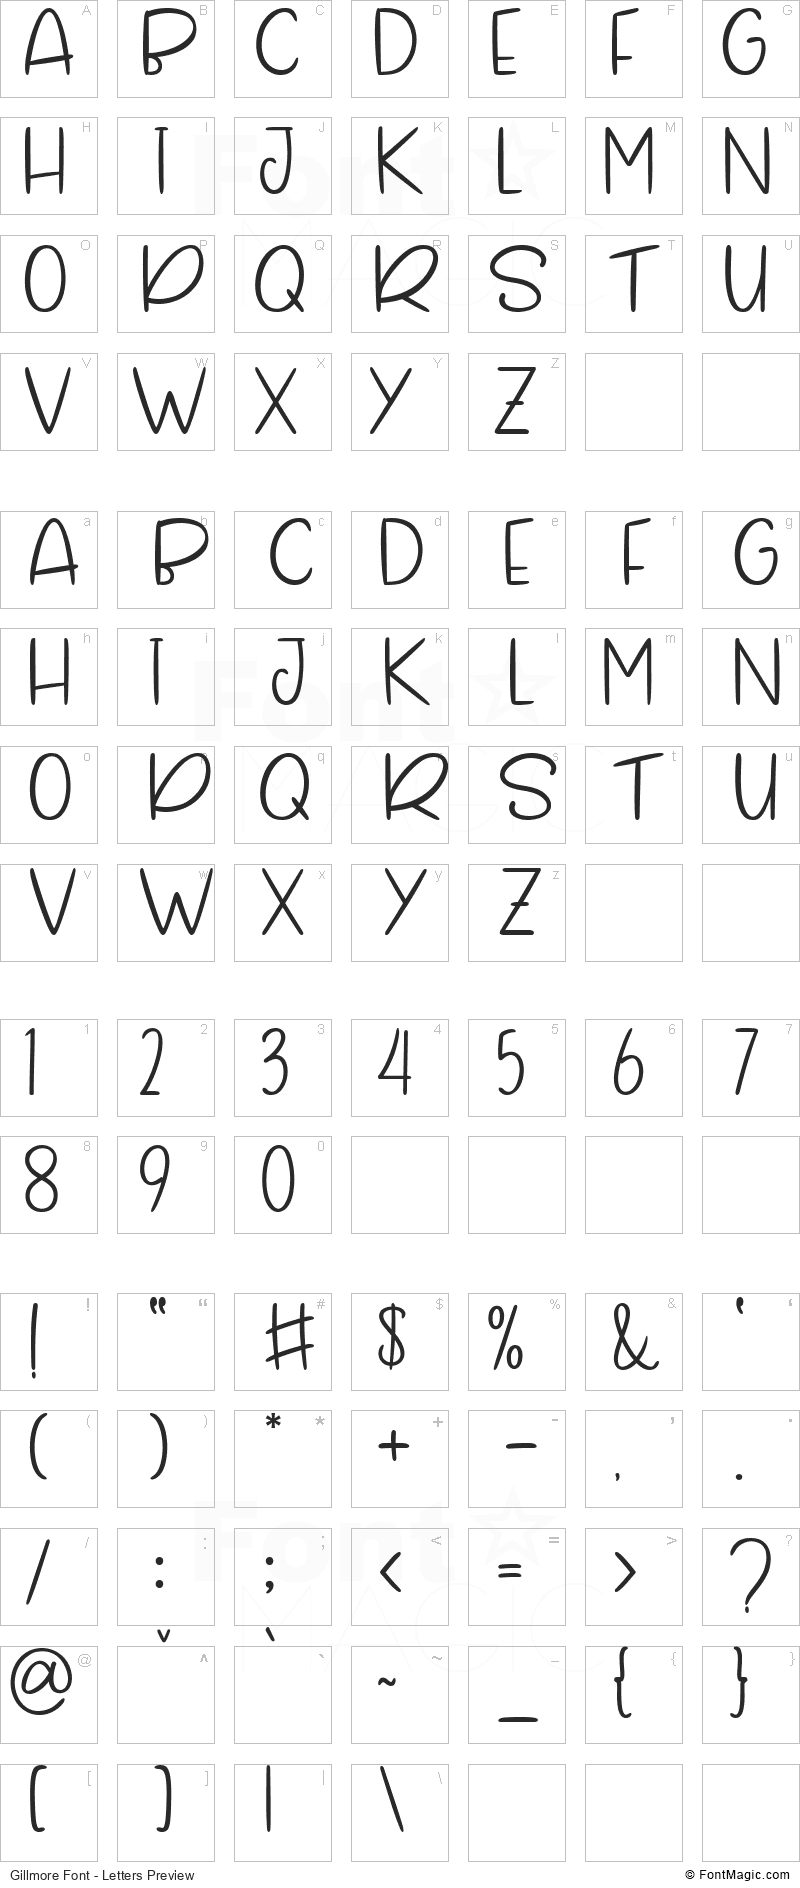 Gillmore Font - All Latters Preview Chart